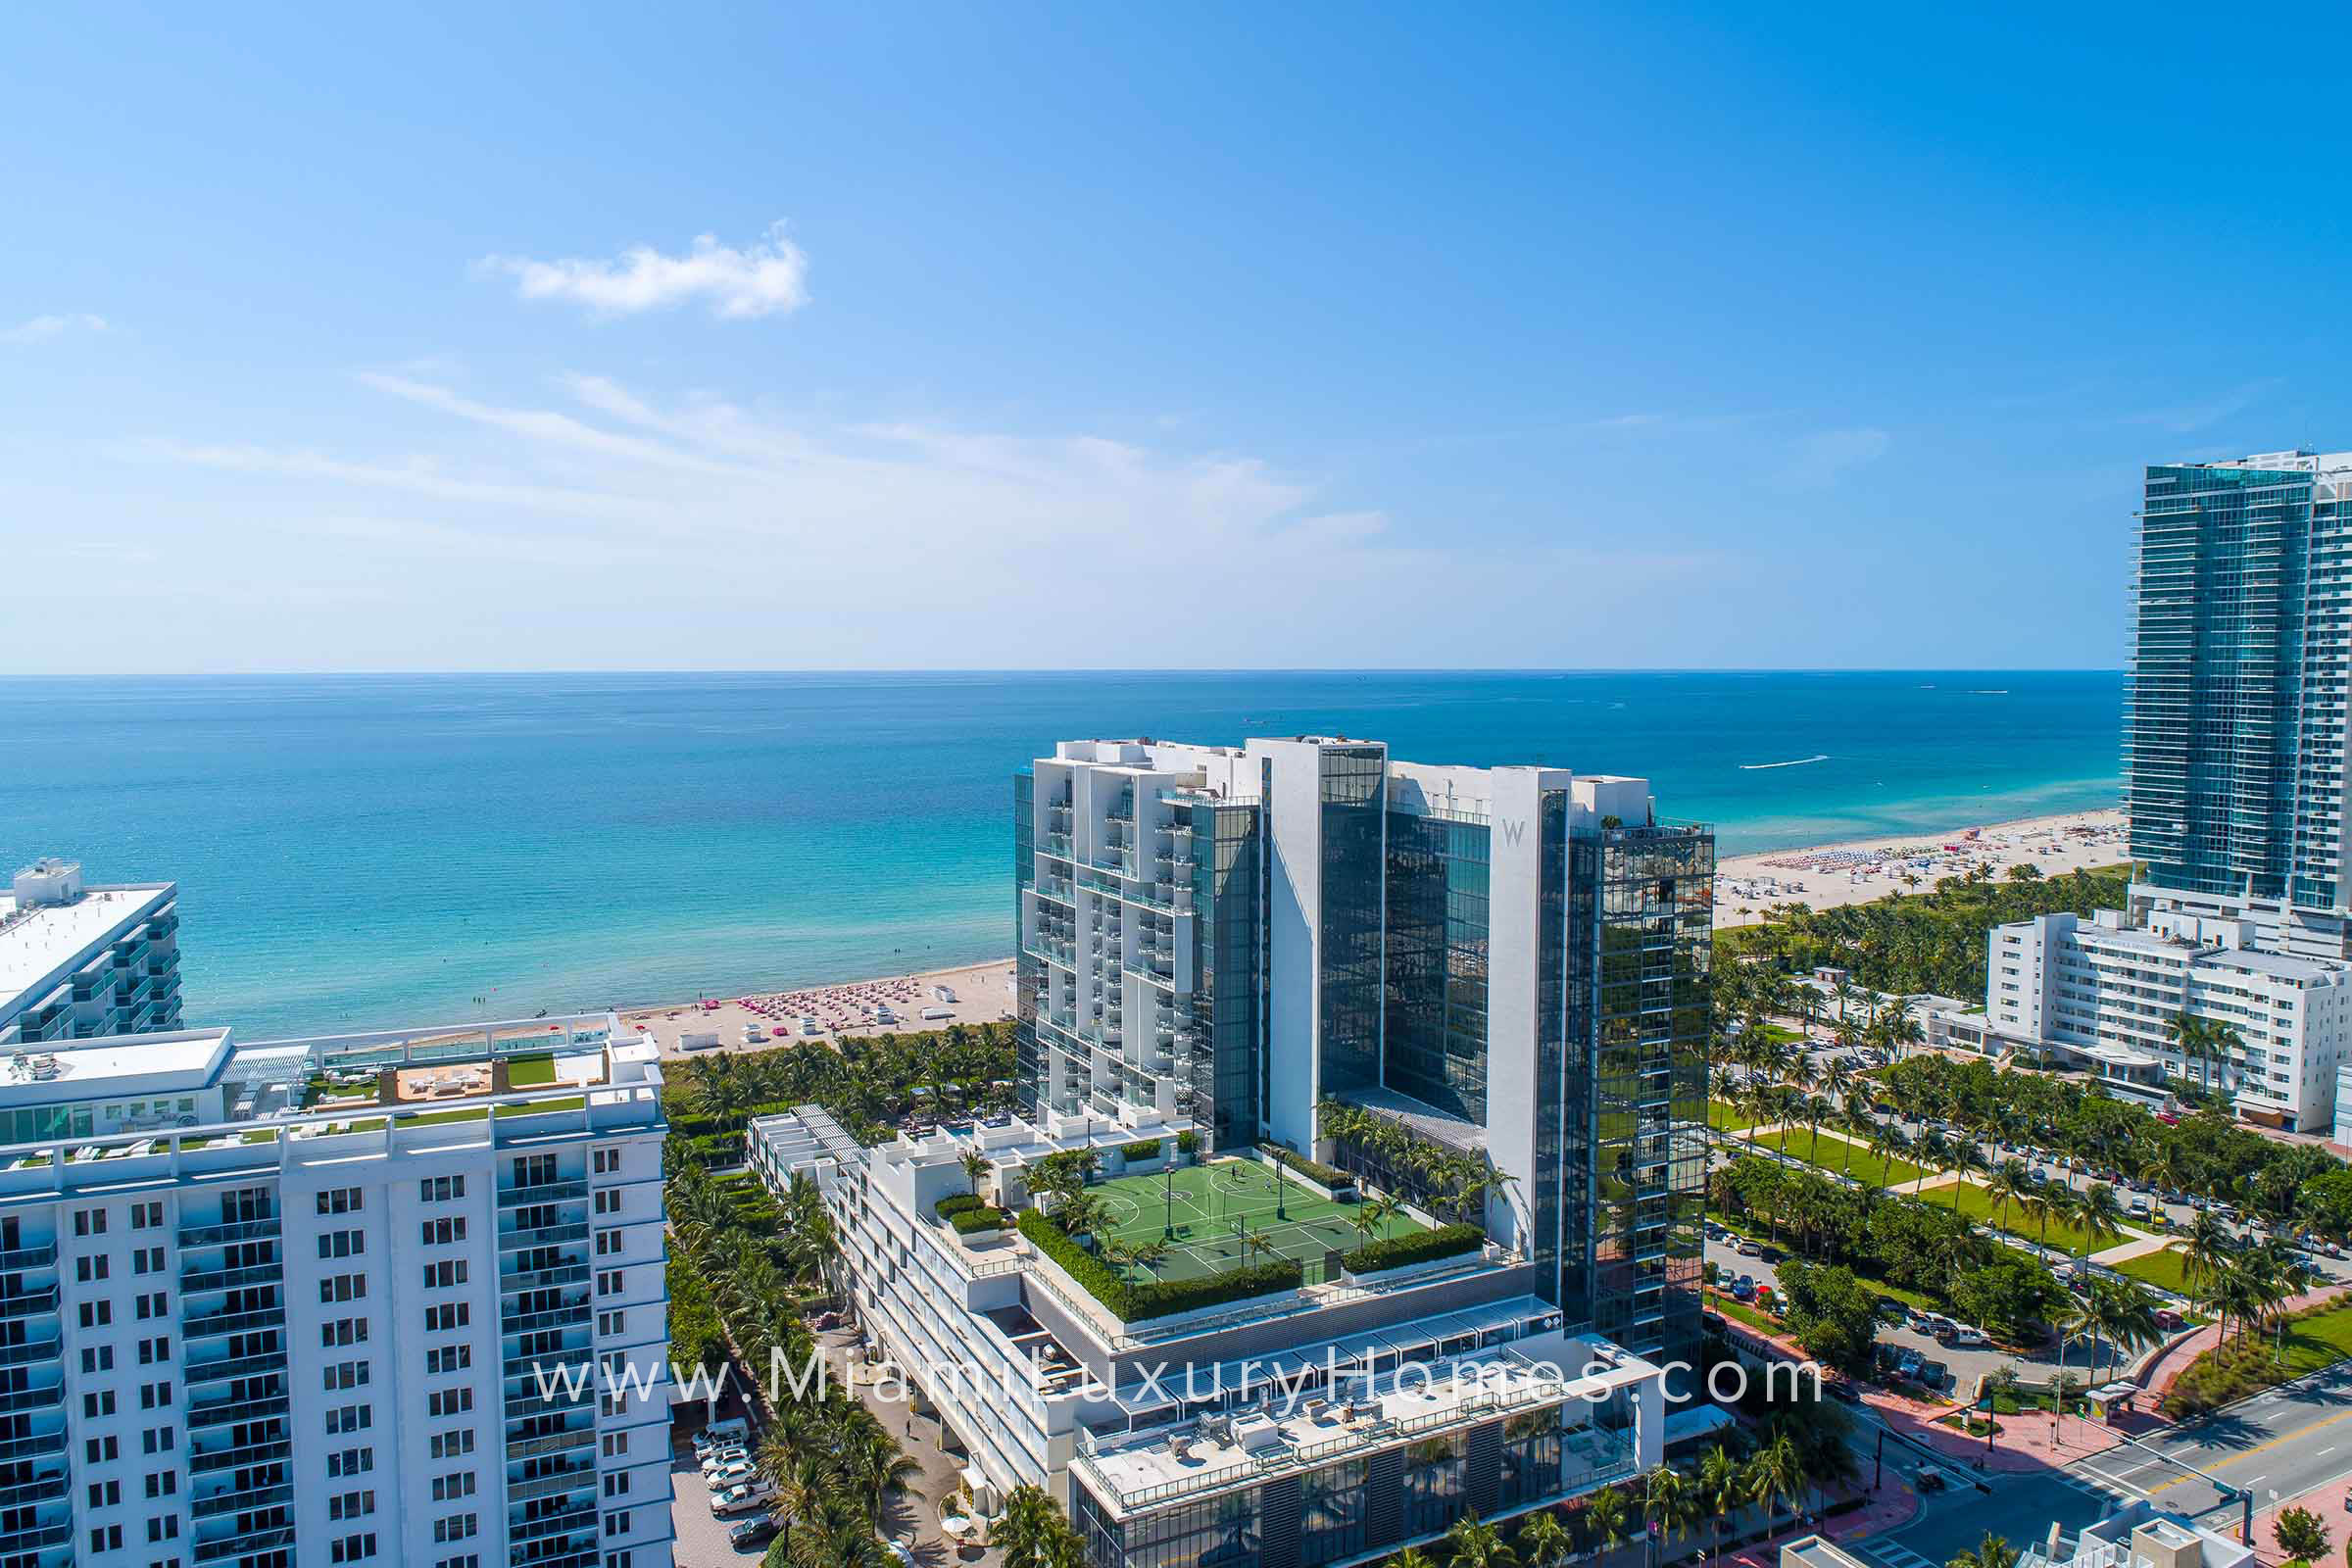 Aerial View of W South Beach Residences in South Beach